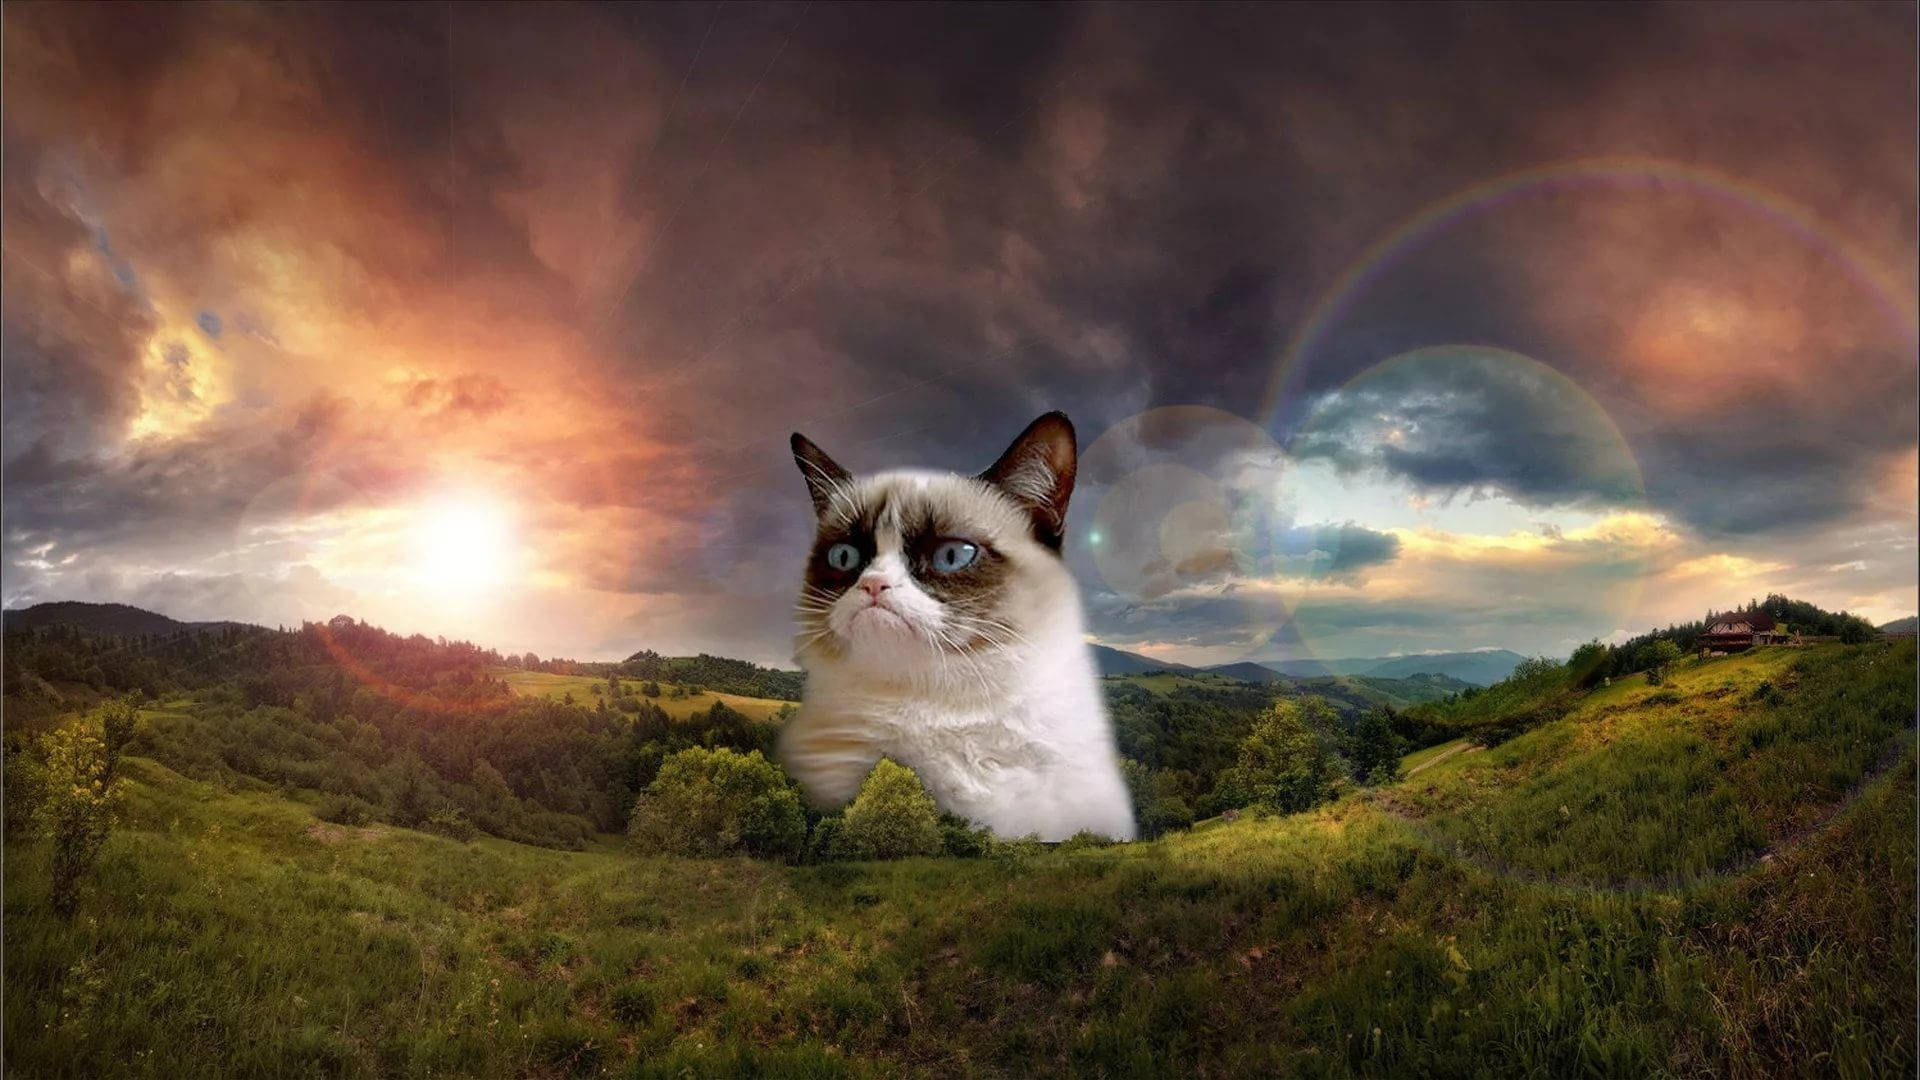 Cat meme with serious grumpy face and sad expression in a landscape mountain.